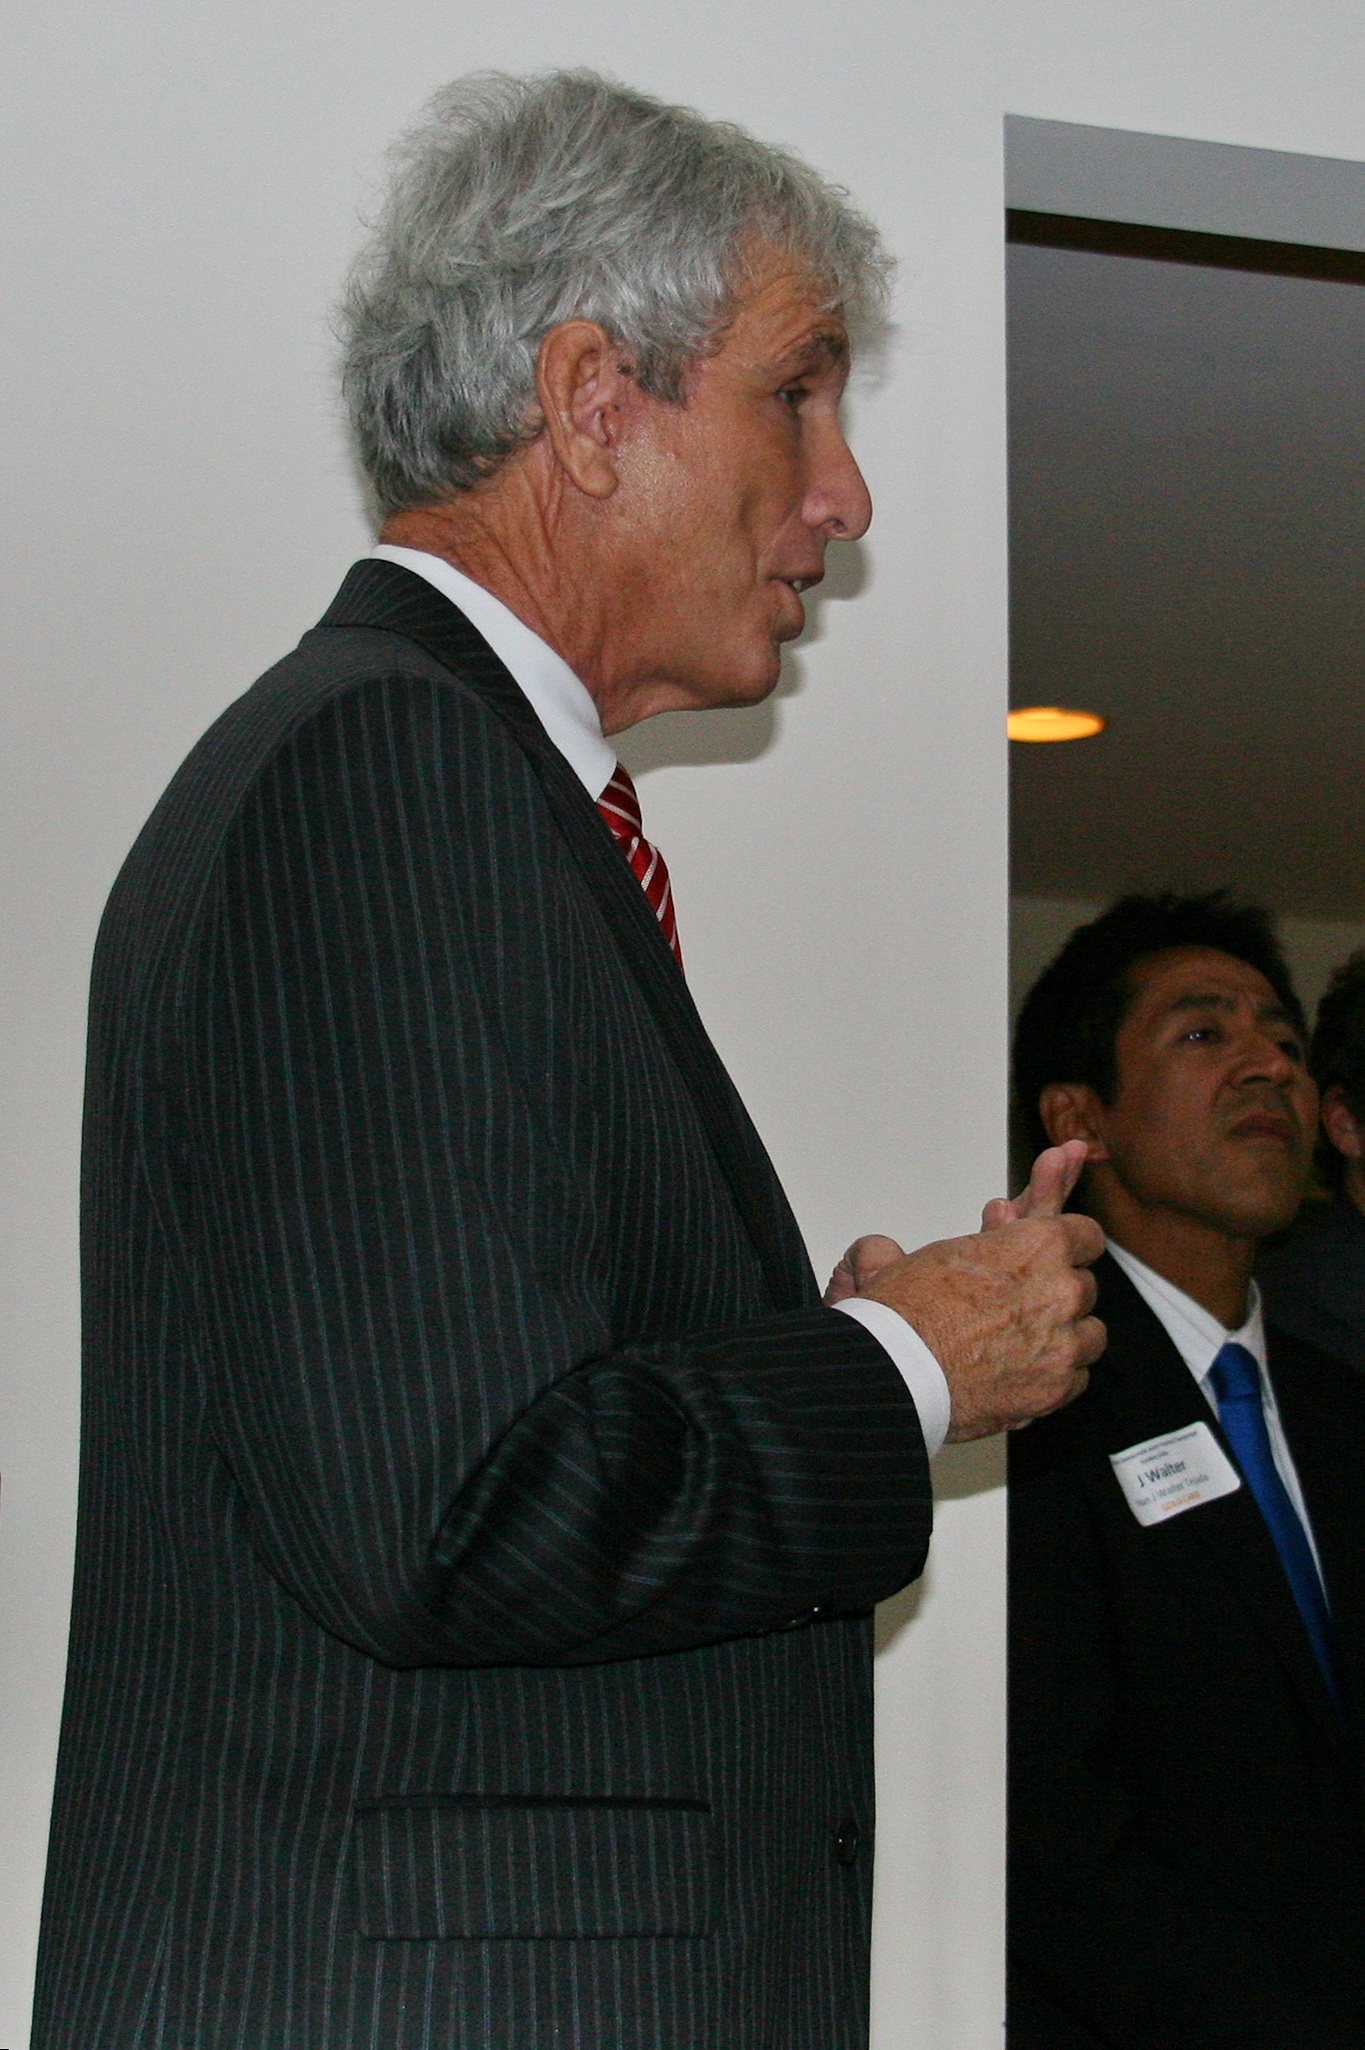 a man wearing a suit talking into another person's ear